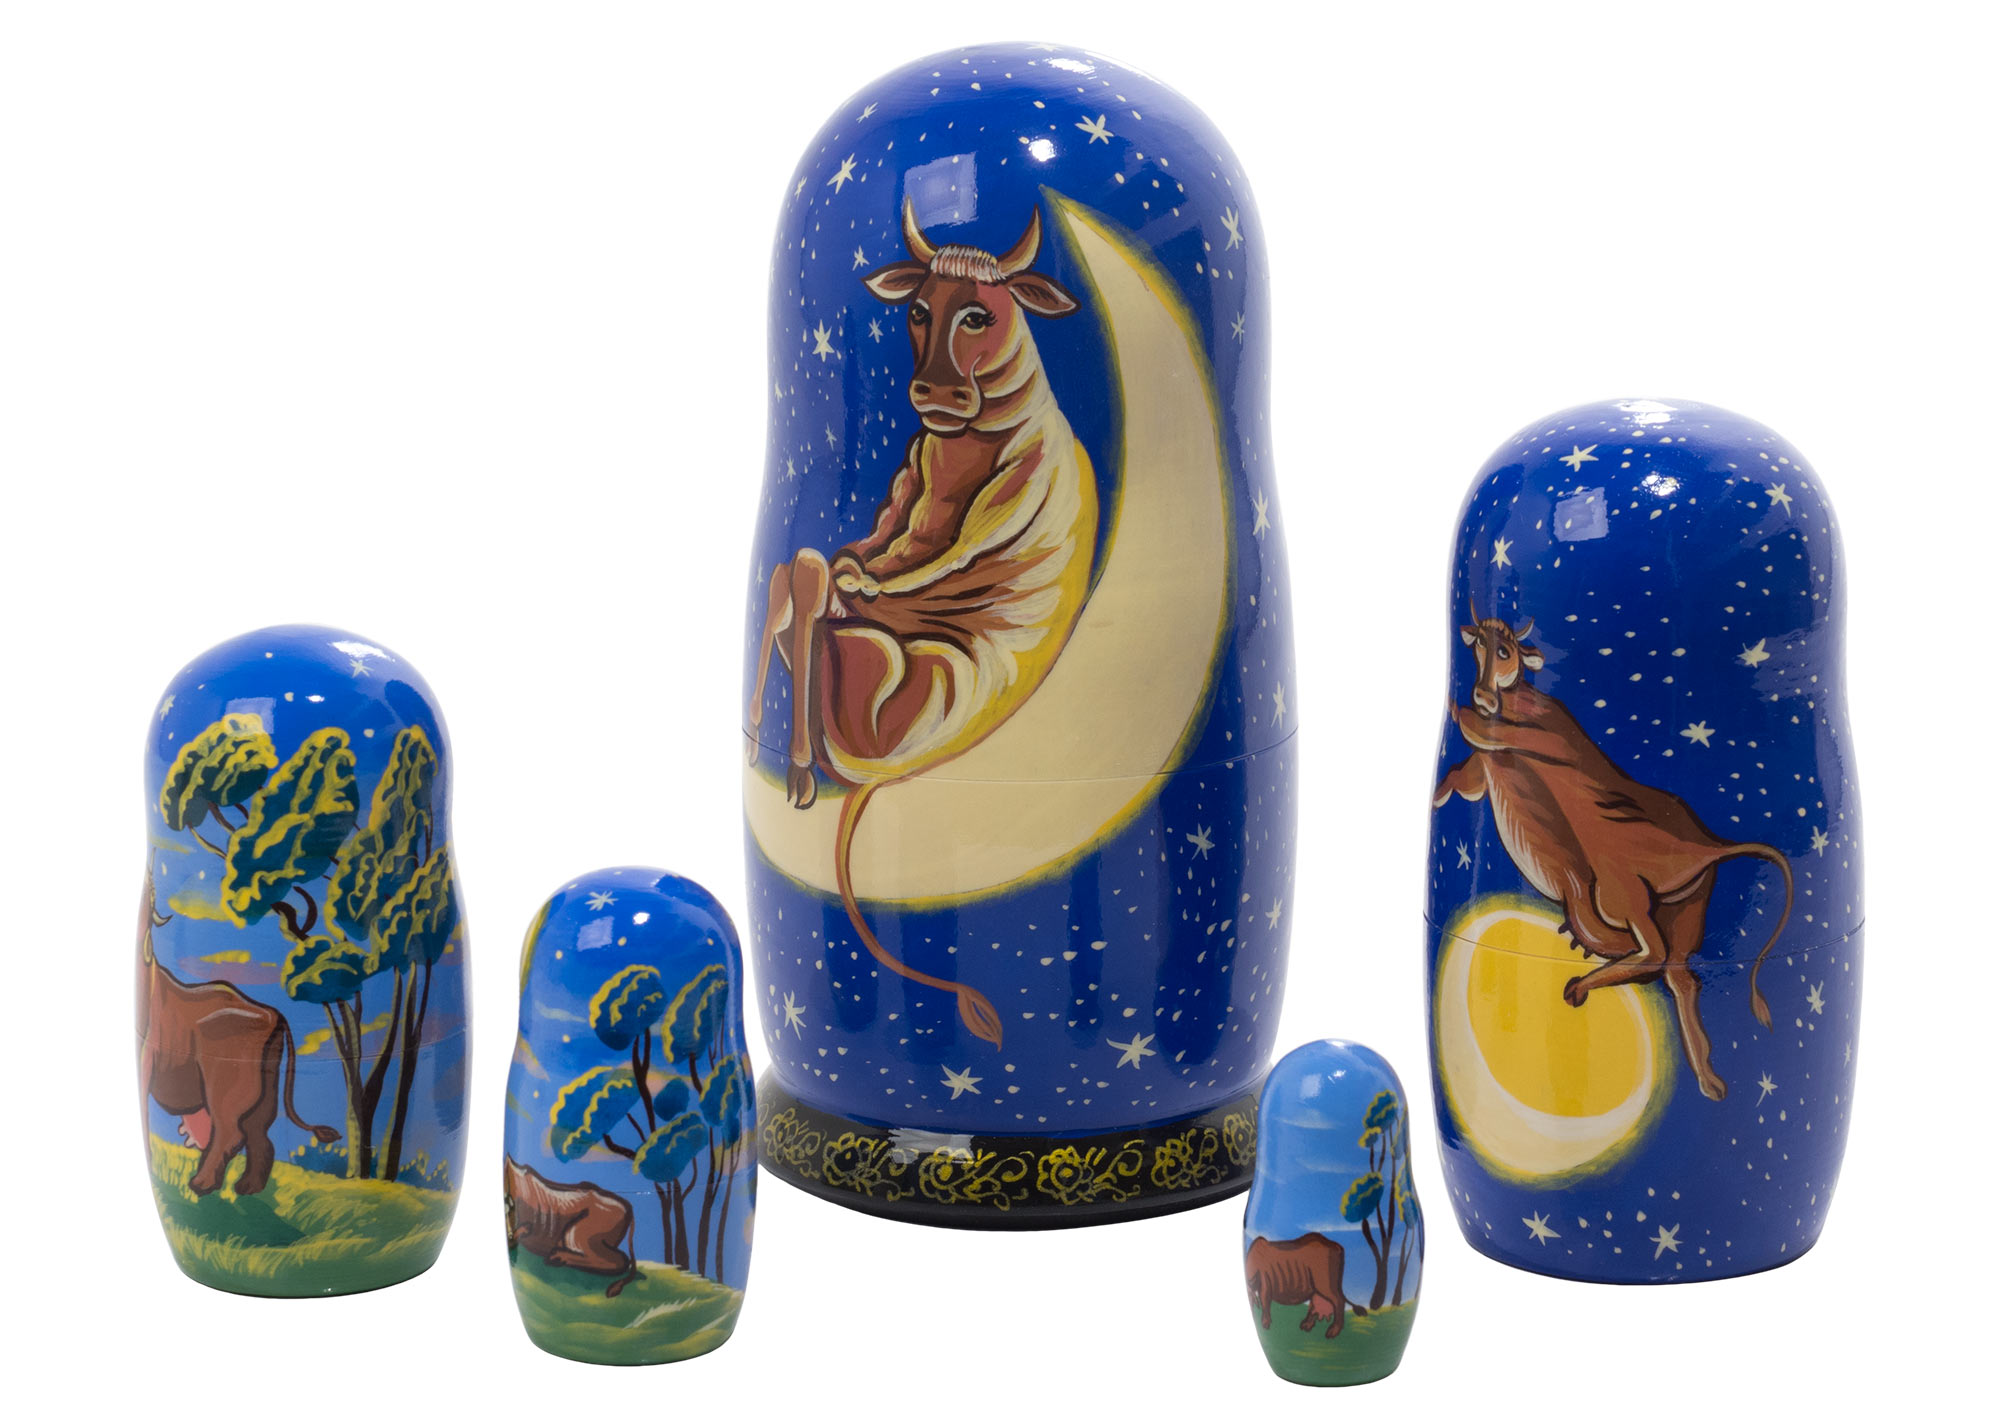 Buy The Cow that Jumped Over the Moon Nesting Doll 5pc./6" at GoldenCockerel.com